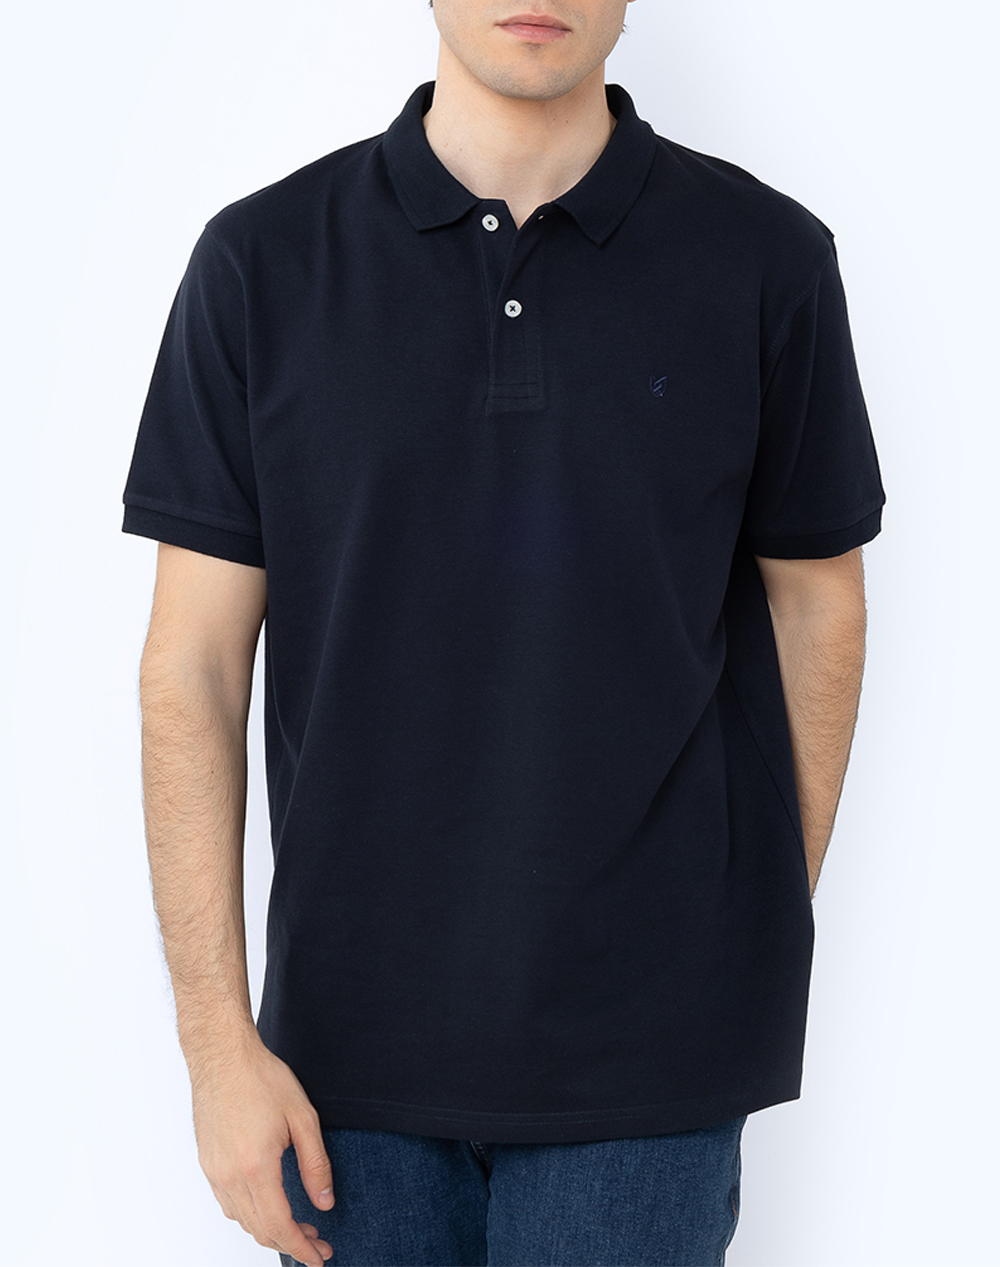 THE BOSTONIANS ΜΠΛΟΥΖΑ POLO PIQUE REGULAR FIT 3PS0001-NAVY NavyBlue